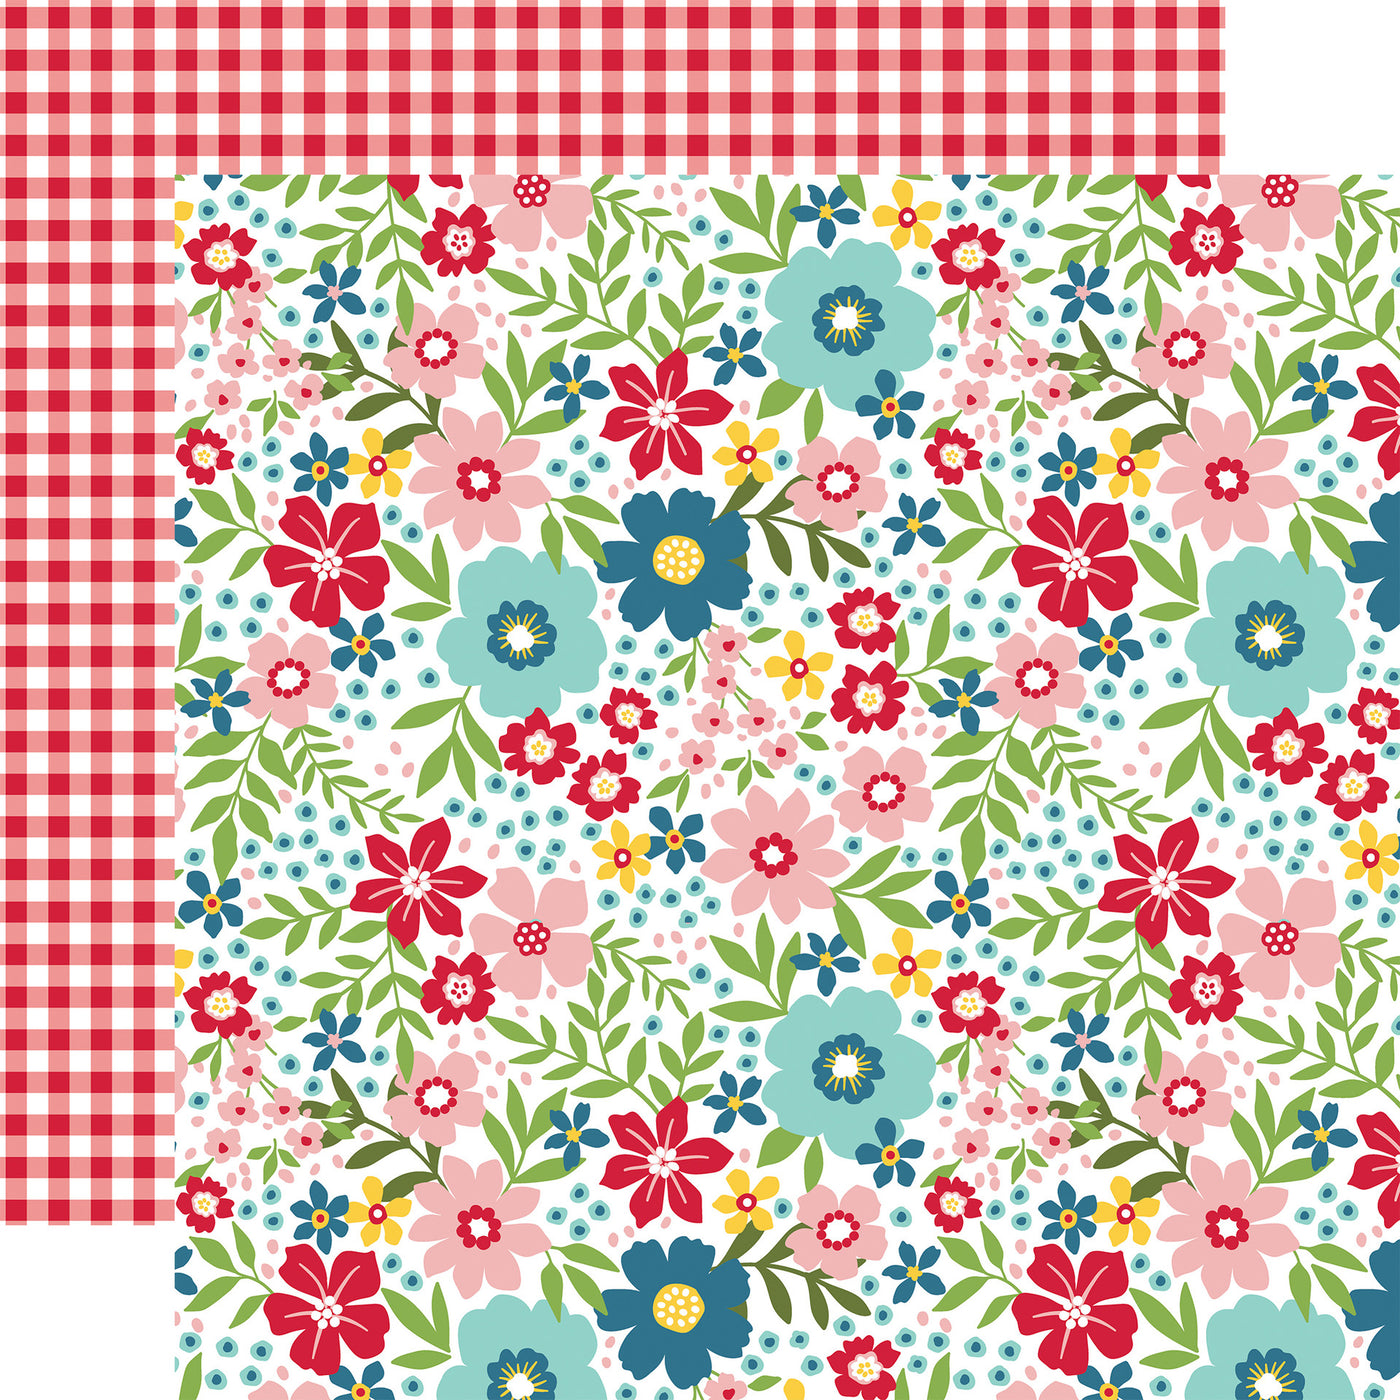 12x12 double-sided patterned paper. (Side A - red, blue, yellow, and pink floral on a white background; Side B - red and white gingham)